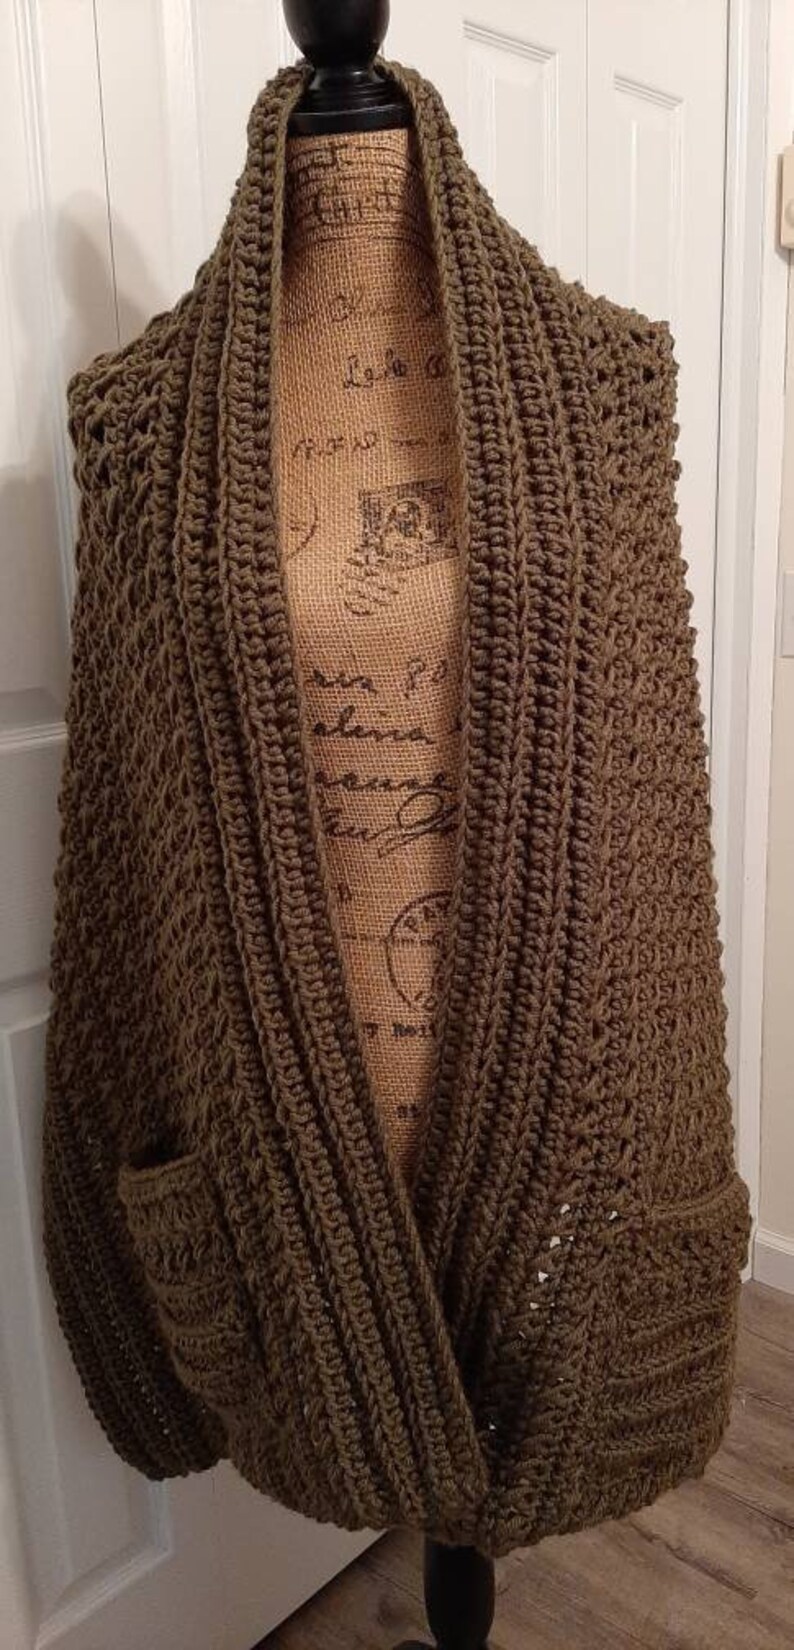 Hand crocheted warm pocket shawl with pockets woman teens fringe or no fringe choice of colors unique design made to order image 1